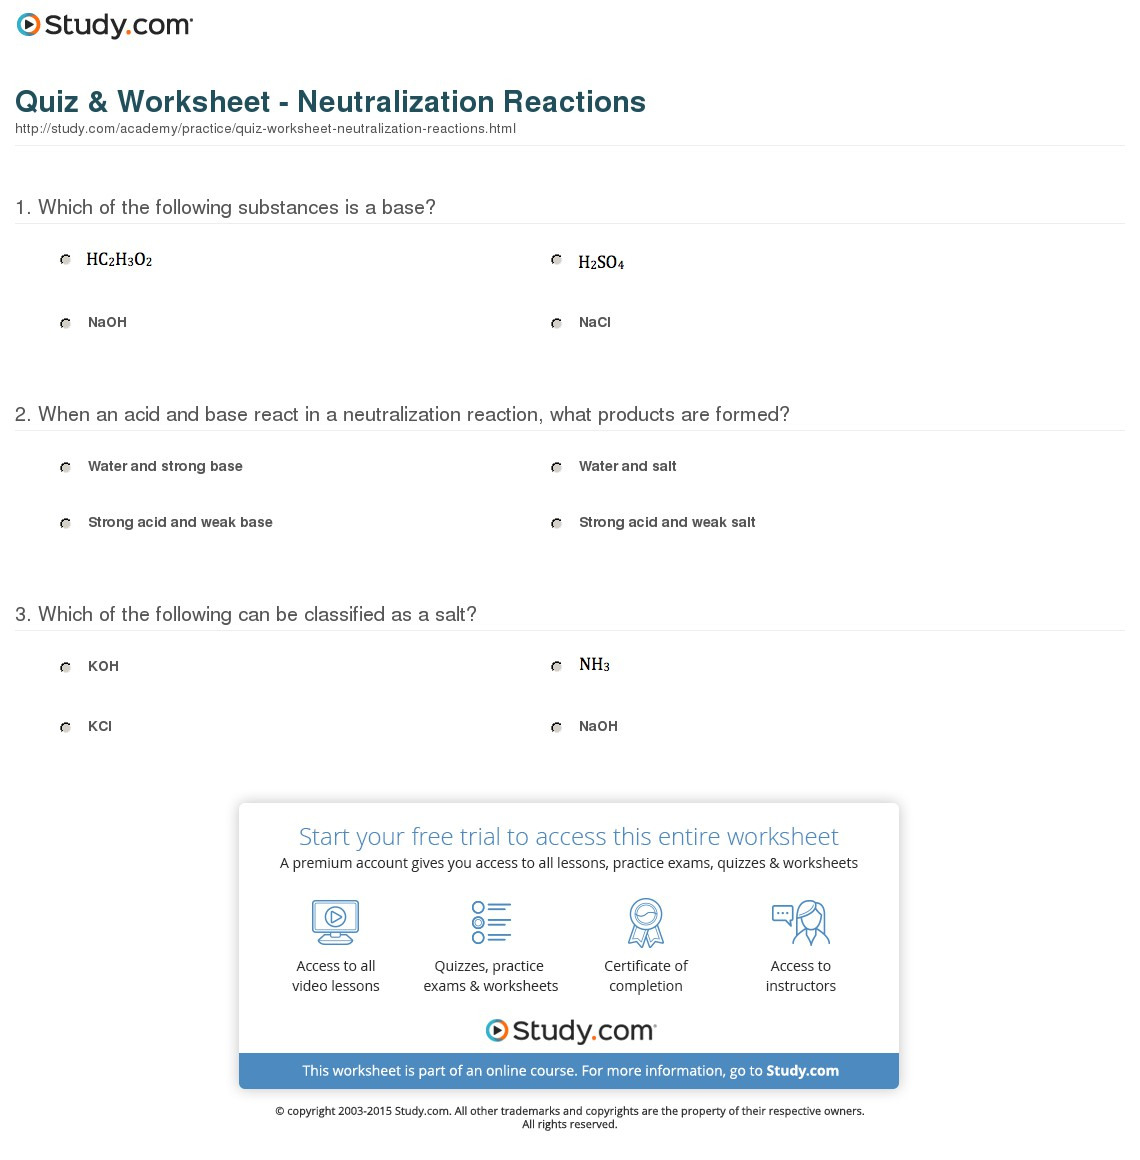 Neutralization Reactions Worksheet Answers db excel com